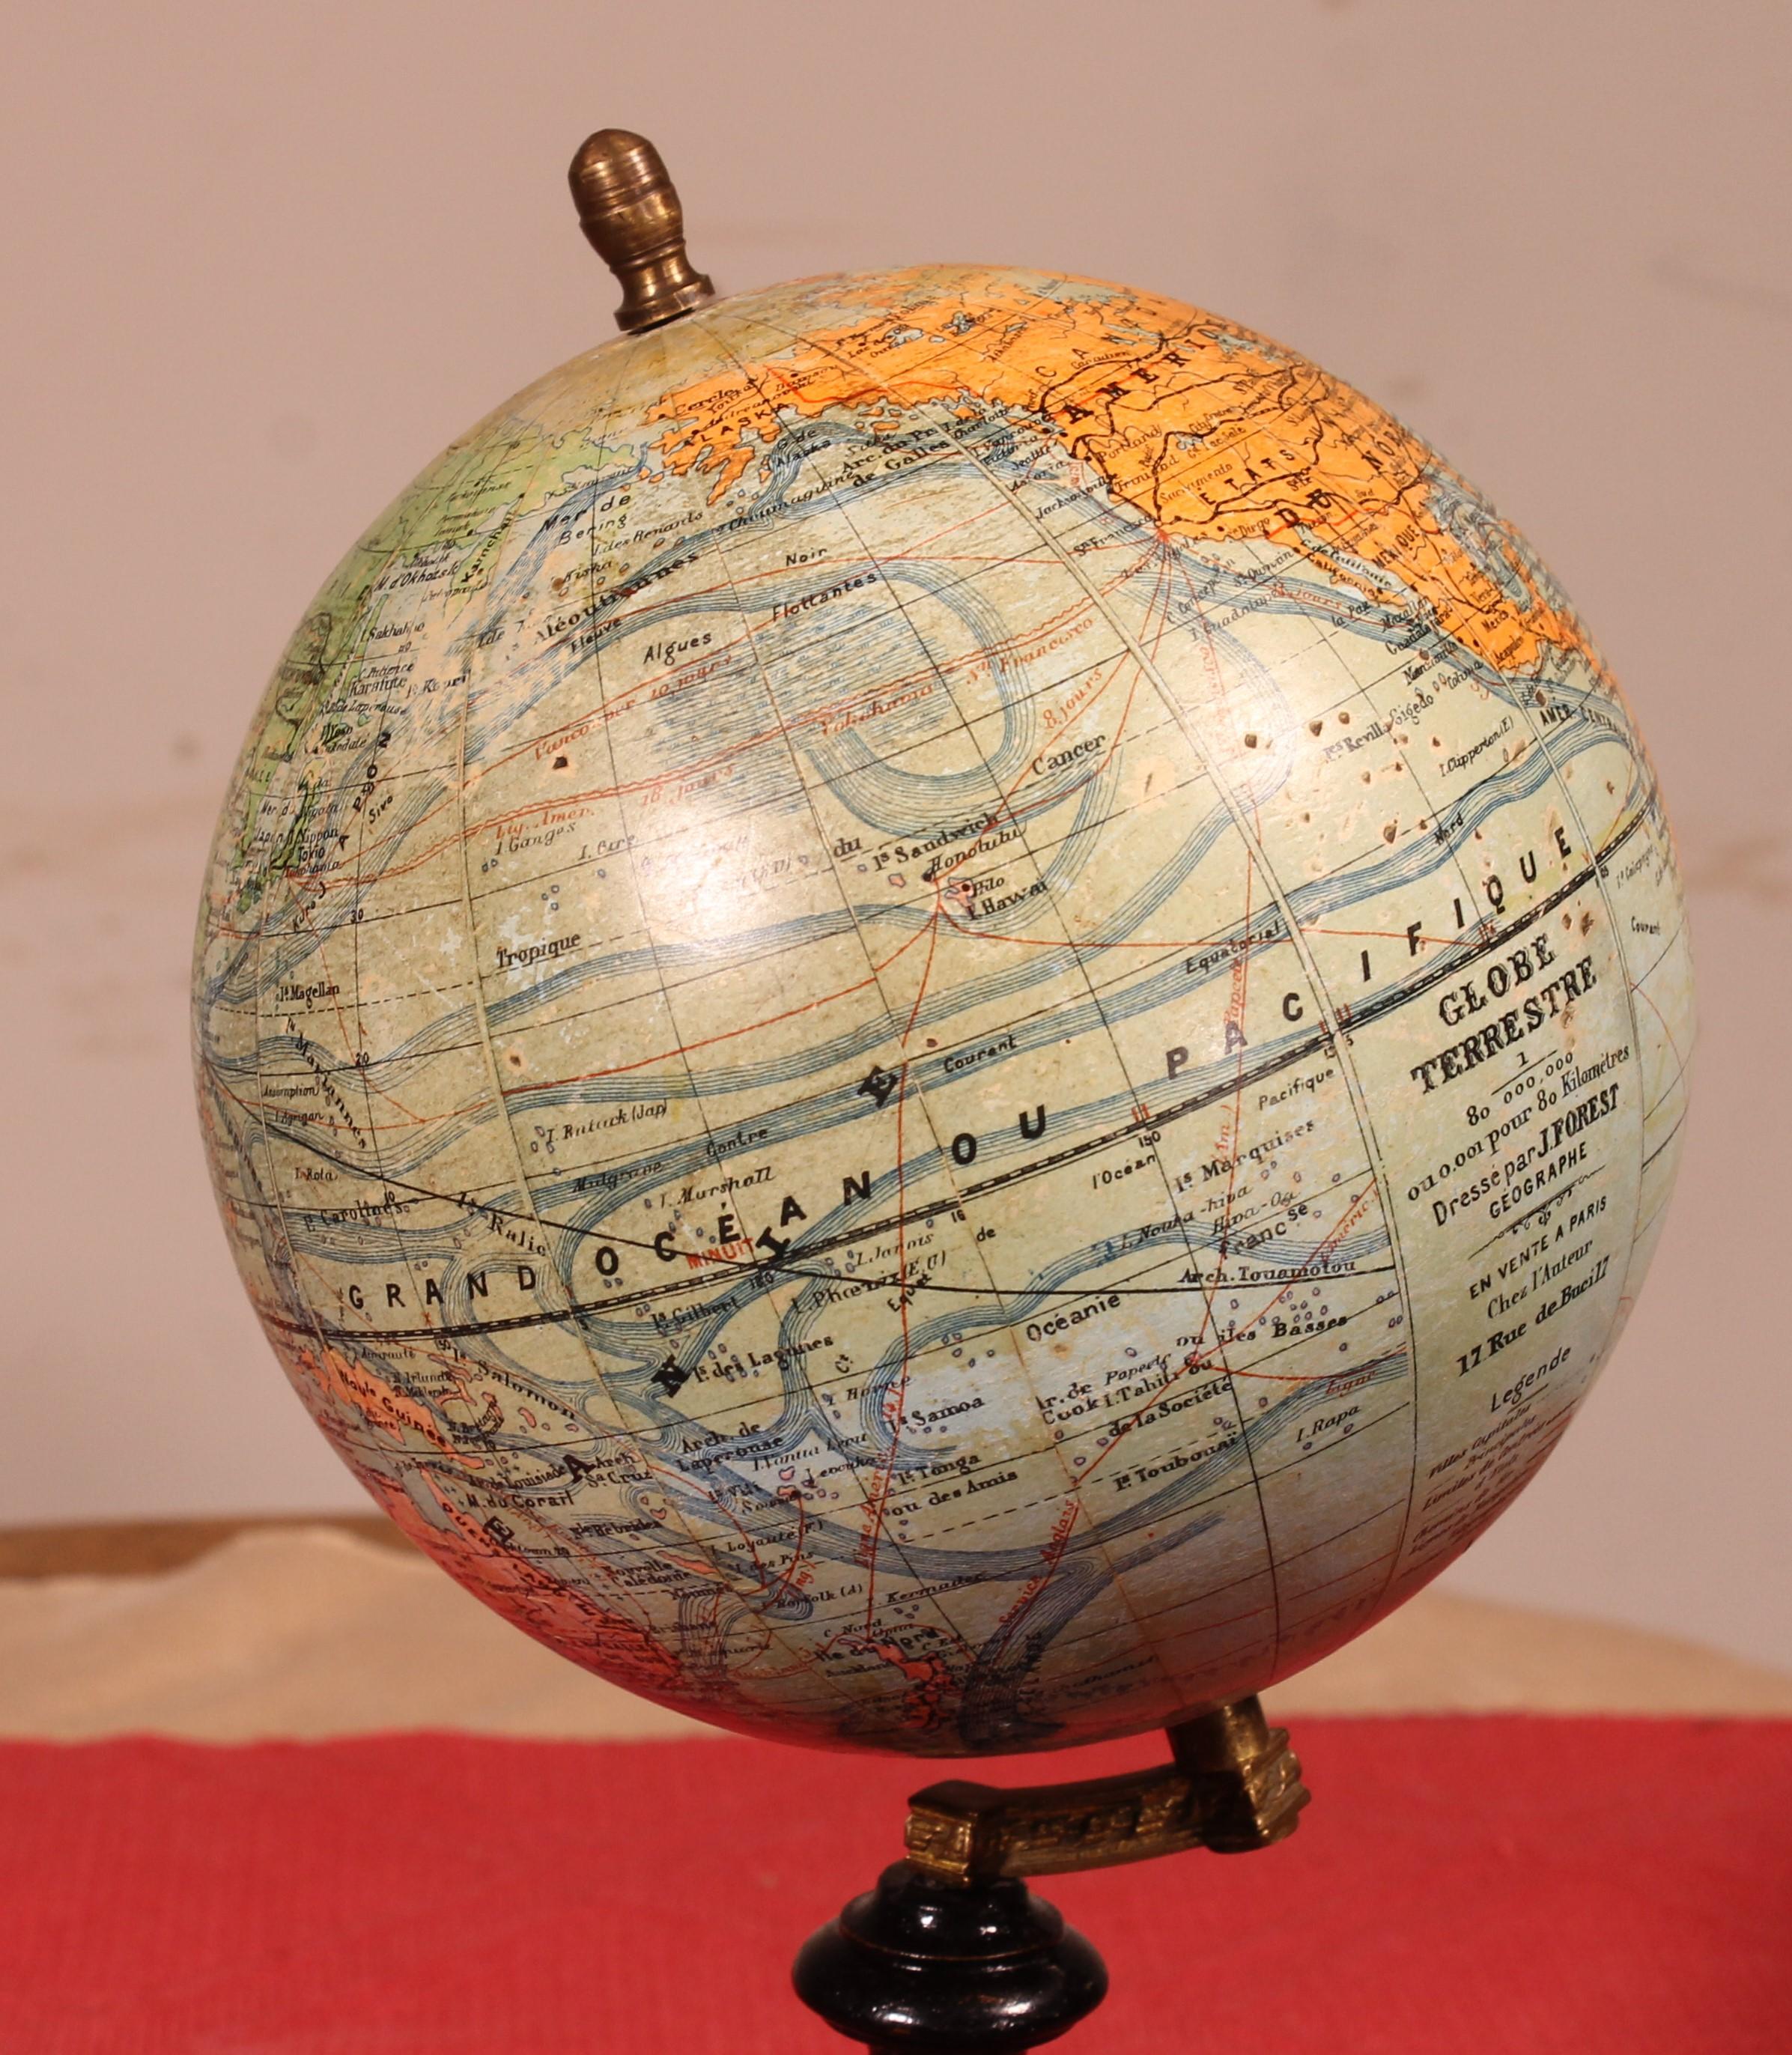 lovely little terrestrial globe by Maison Forest Rue de bucci circa 1910

Very beautiful terrestrial globe in superb condition. no pock some traces of wear, but really minimal which has kept very beautiful colors with beautiful colors of blue thanks